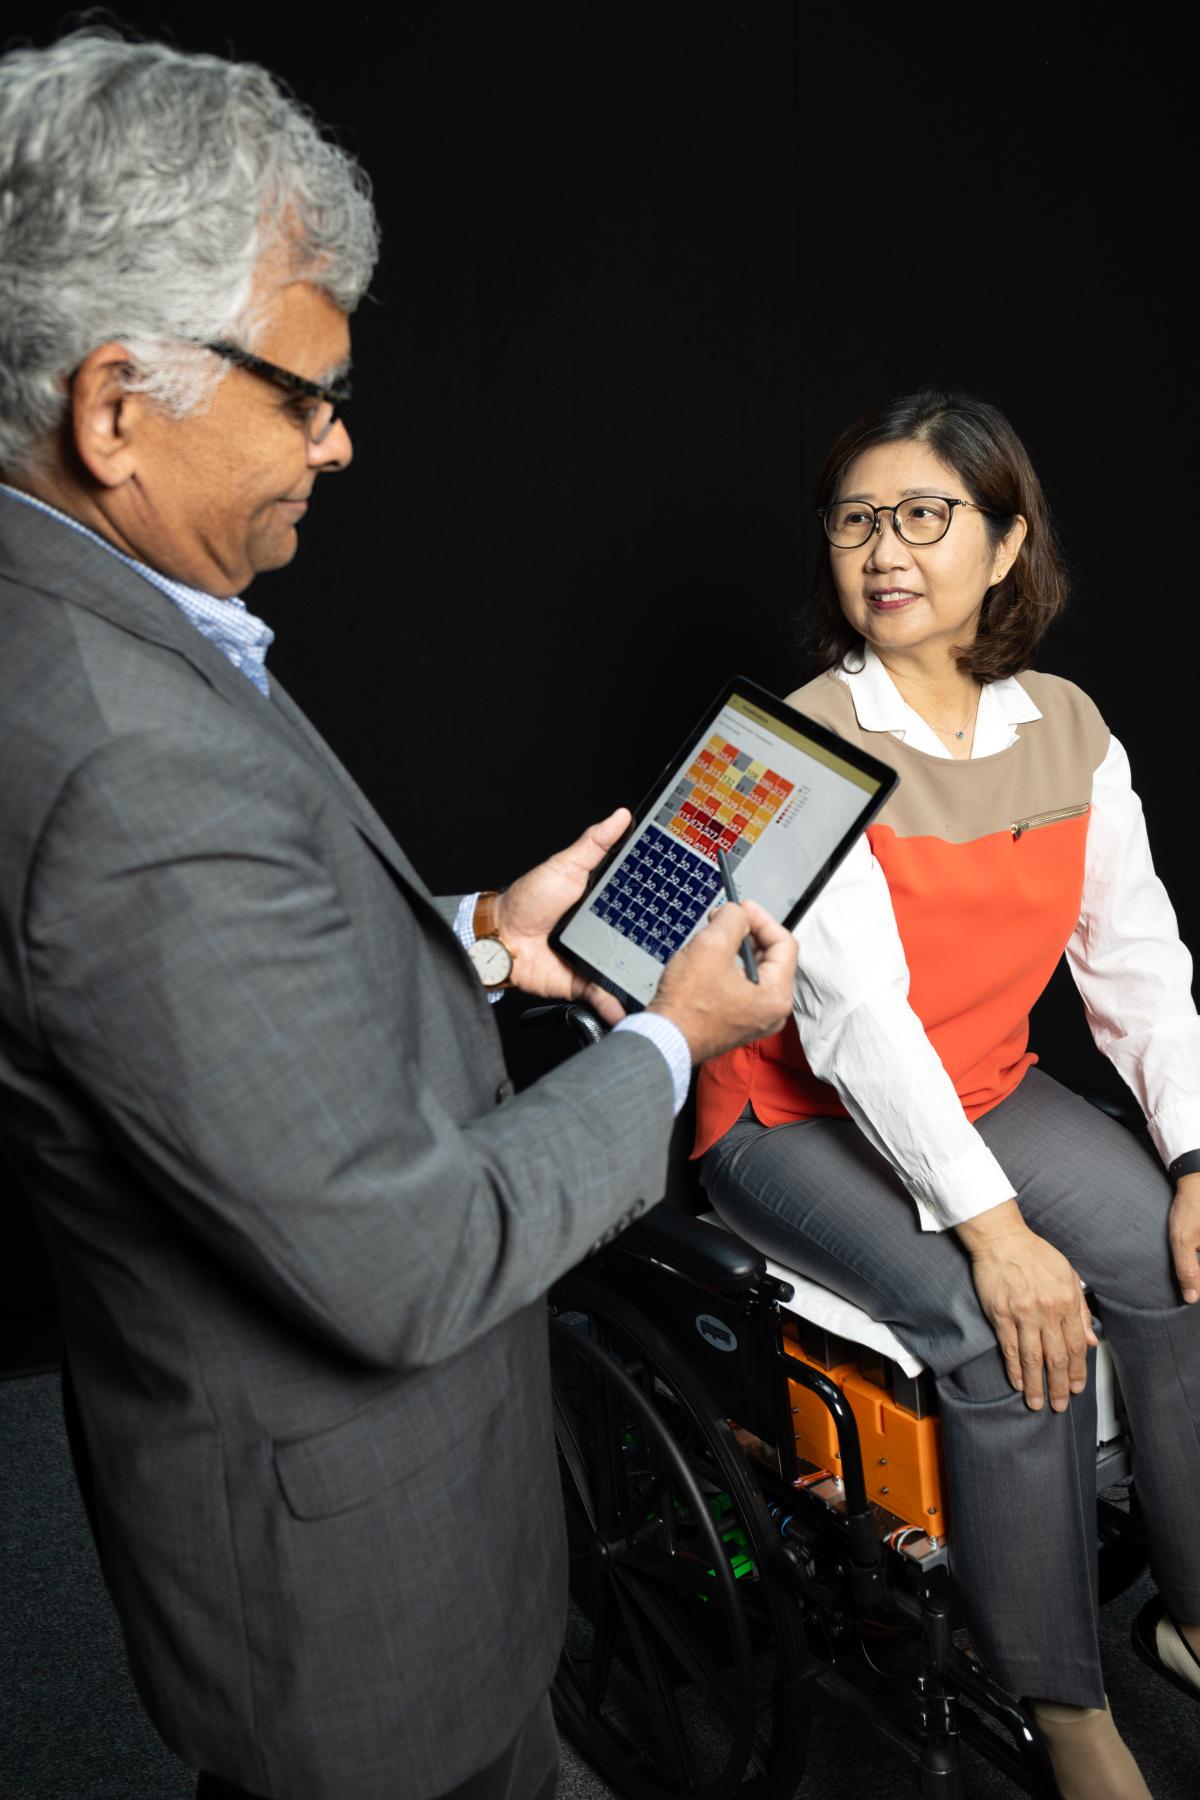 Sundaresan Jayaraman looks at a tablet with data while Sungmee Park is seated in the novel wheelchair system